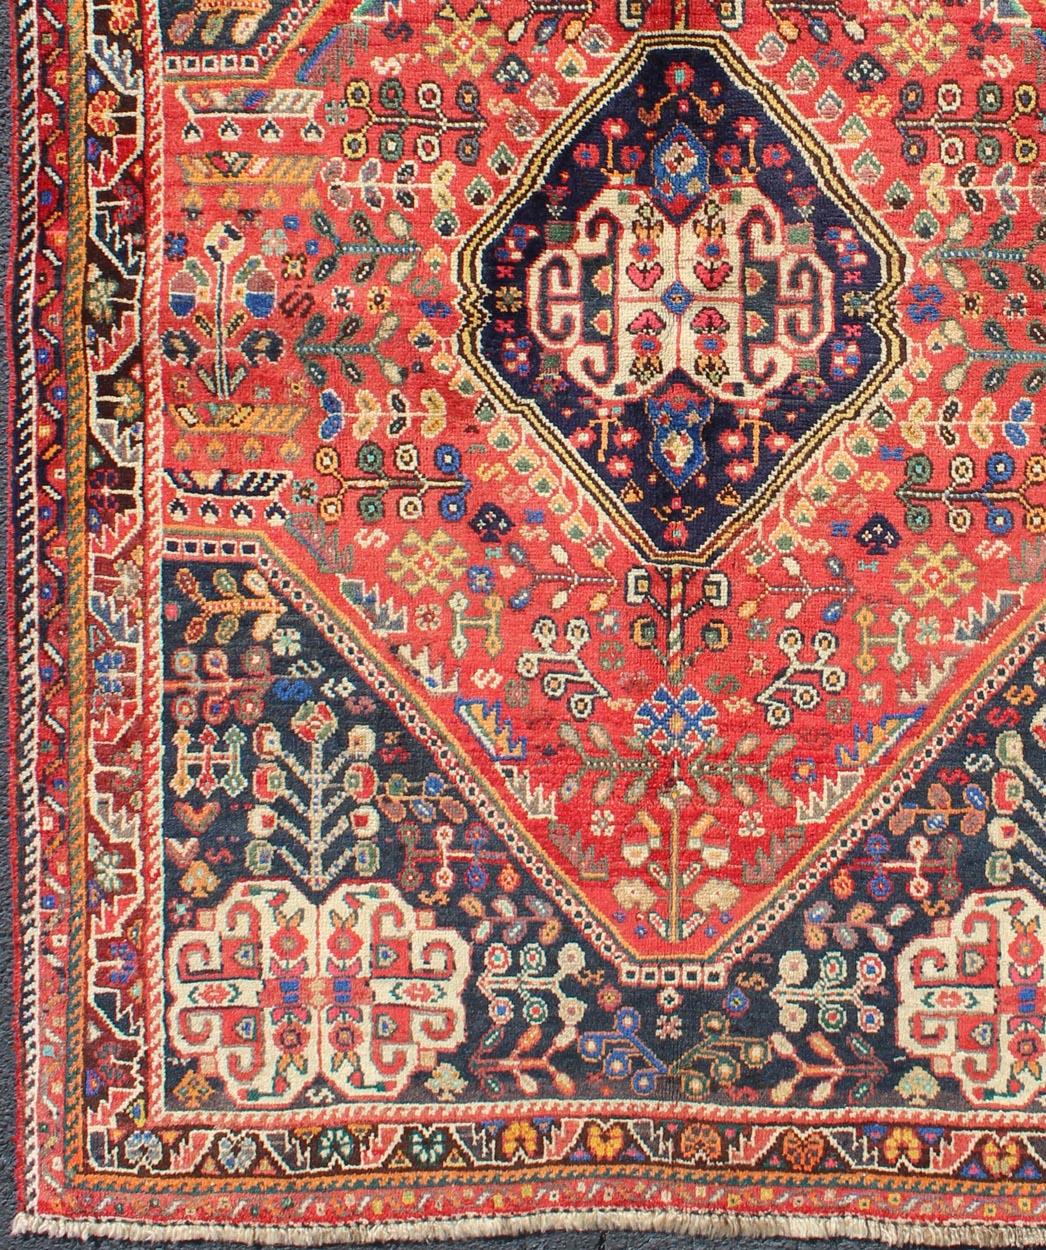 This multicolored Persian rug features an all-over background accompanied by a central medallion in vivid colors.
Measures: 4'1 x 6'0.